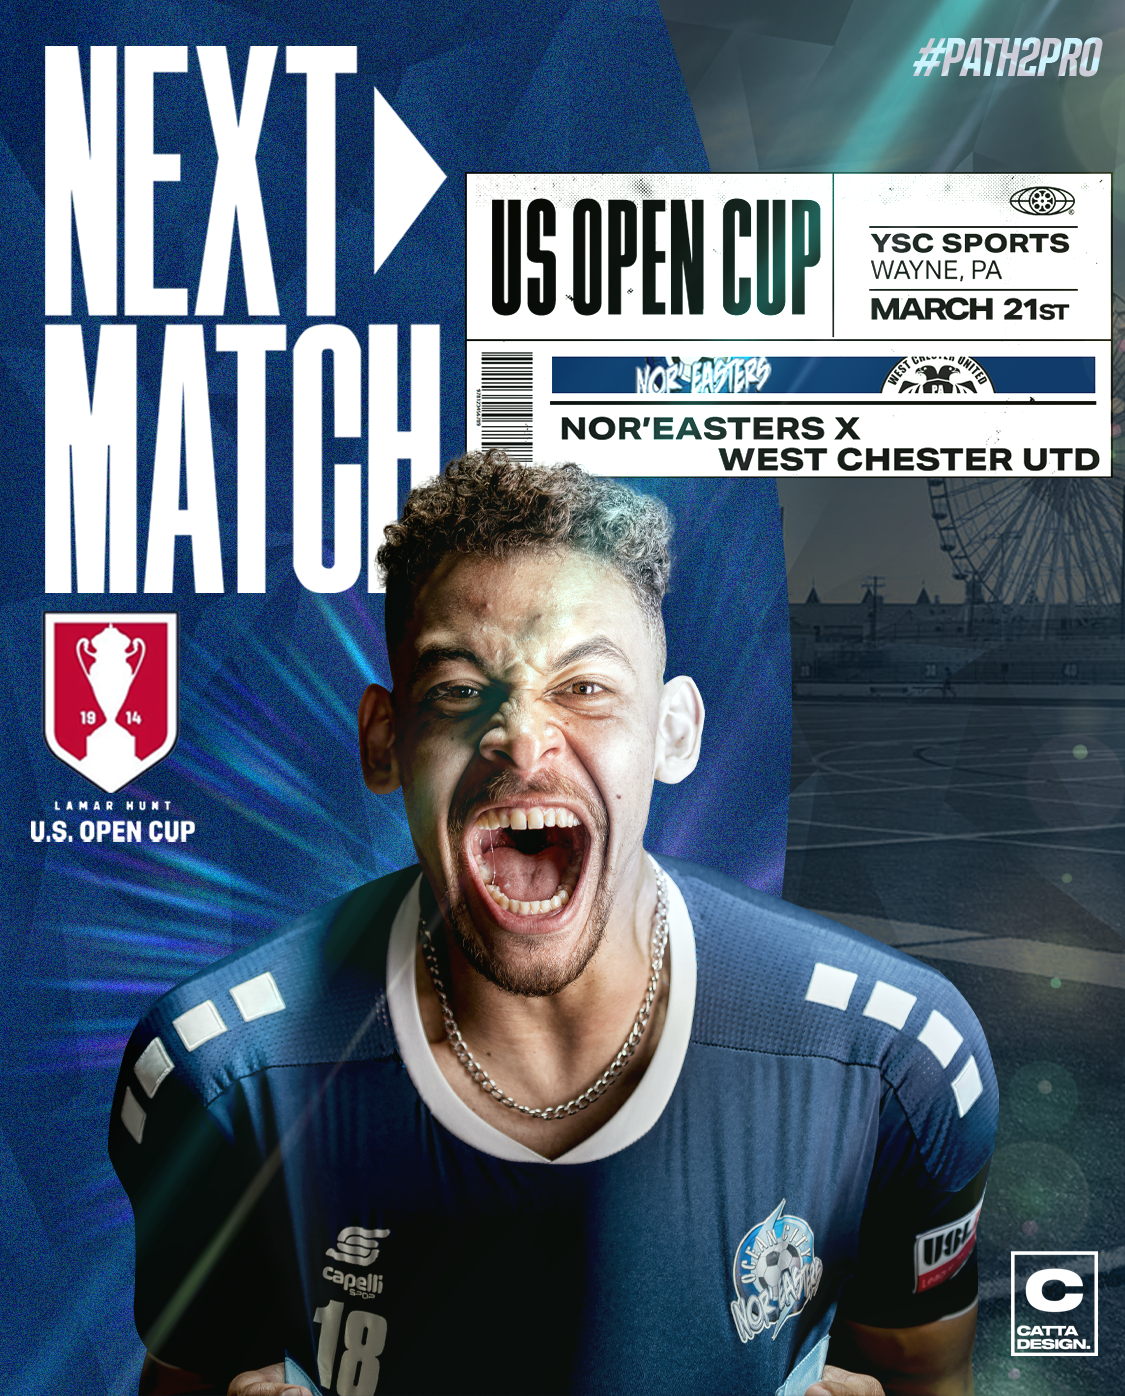 Nor'easters travel to West Chester United for opening match of 108th US Open Cup